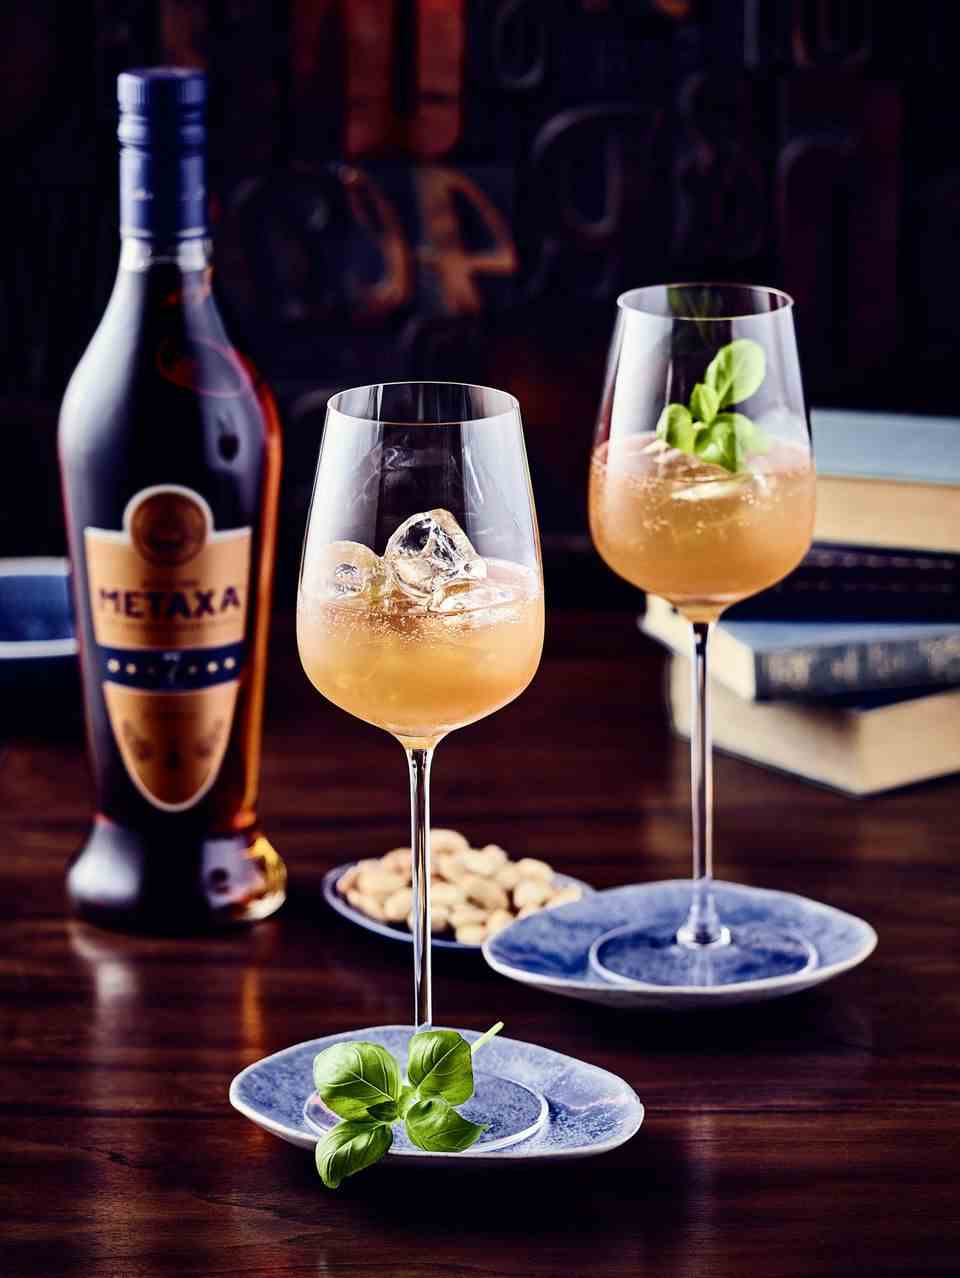 With Metaxa you can also prepare a spritz cocktail